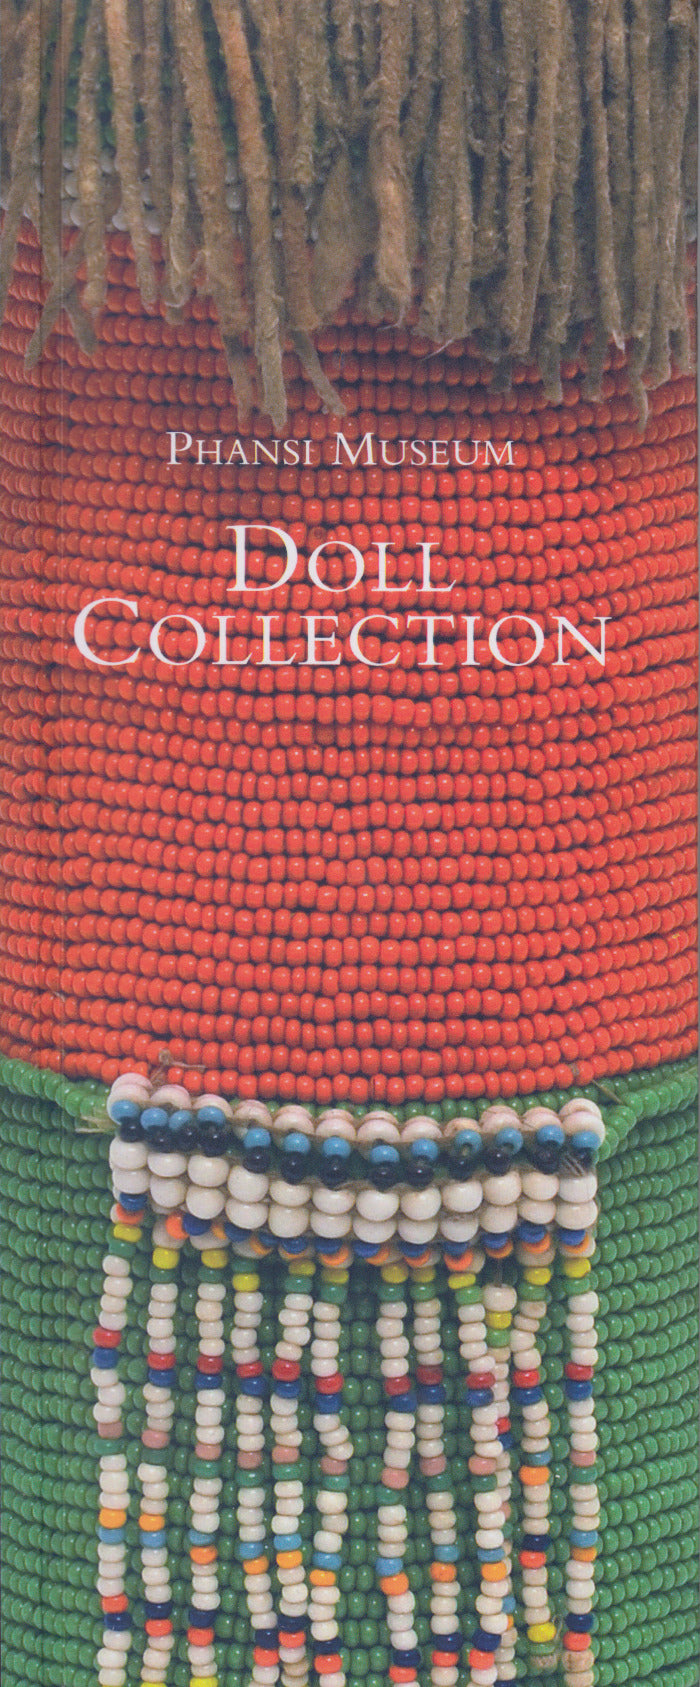 DOLL COLLECTION